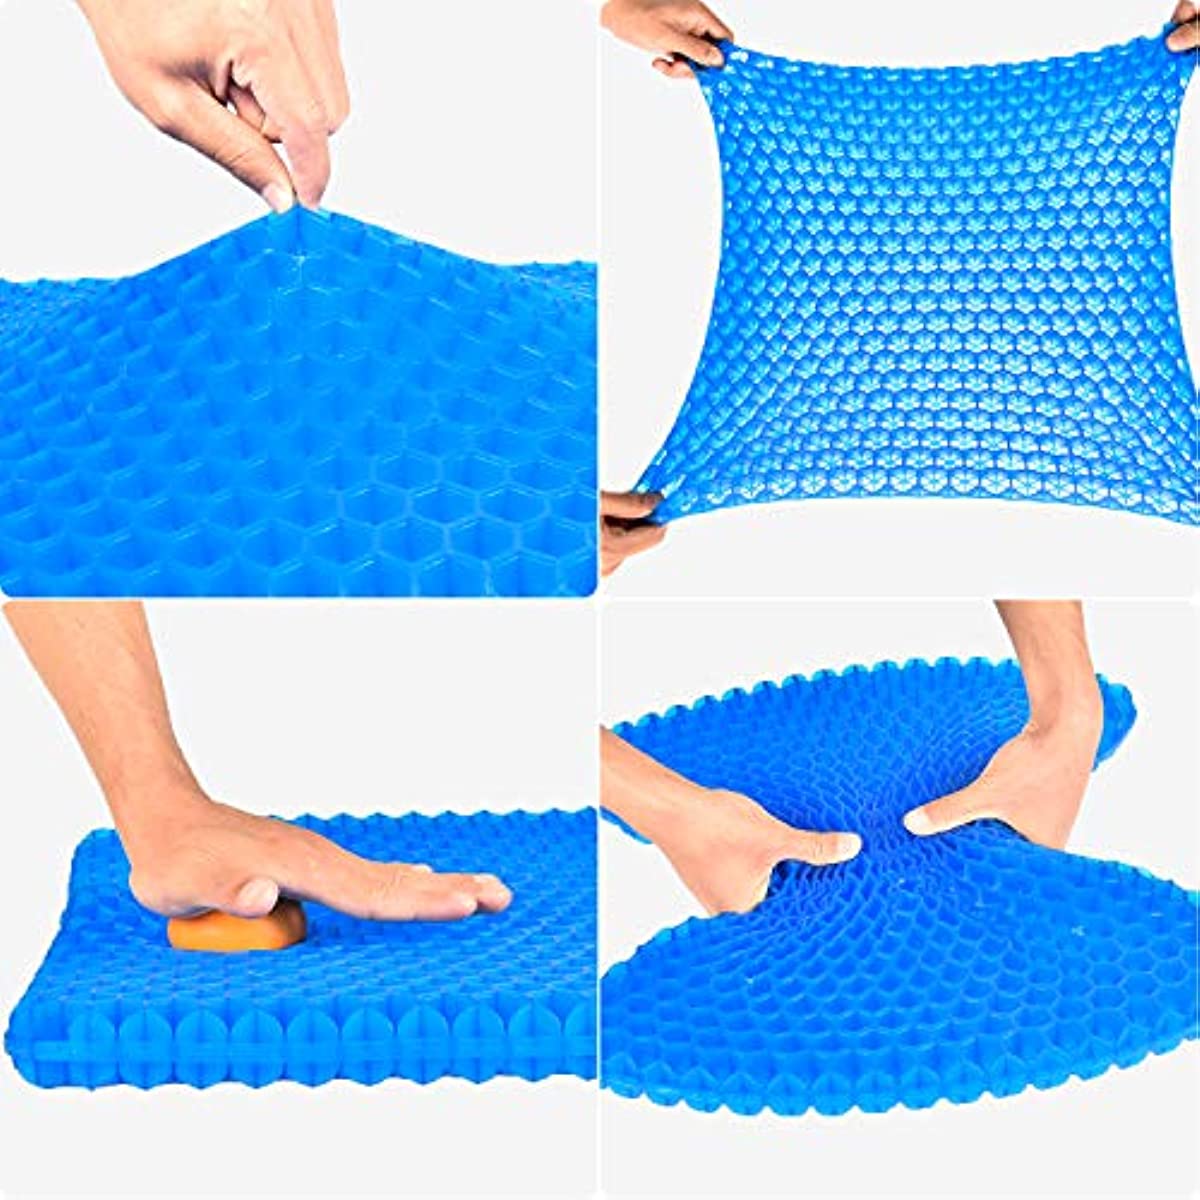 Gel Seat Cushion Breathable Hip Pain Honeycomb Design Chair Cars Ice Pad  Outdoor